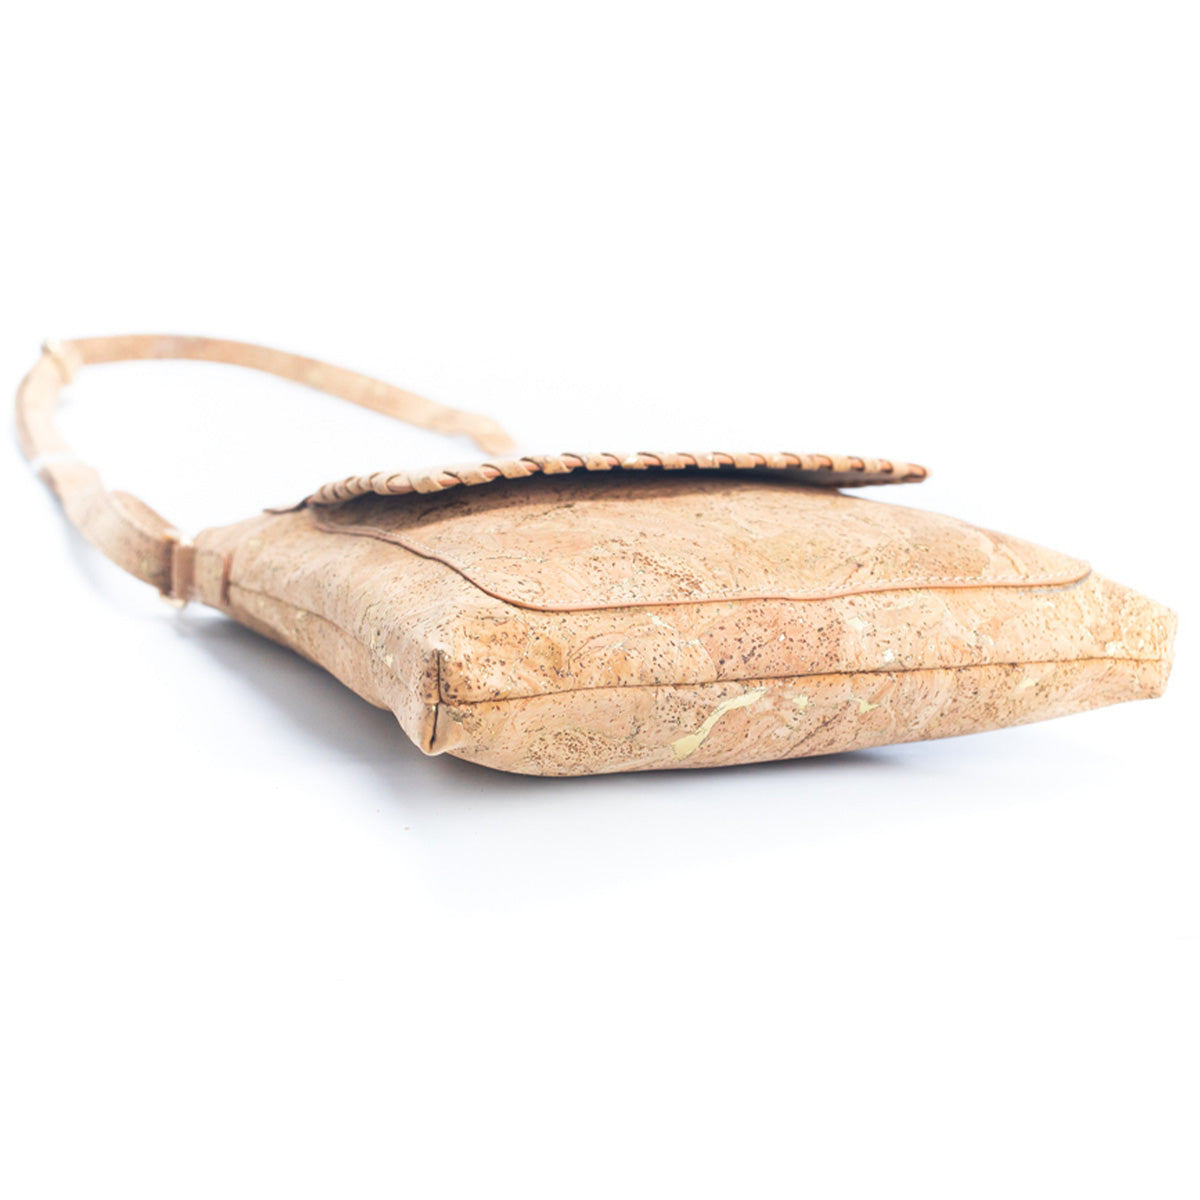 Natural Cork w/ Gold & Silver Accents Women's Crossbody Bag | THE CORK COLLECTION